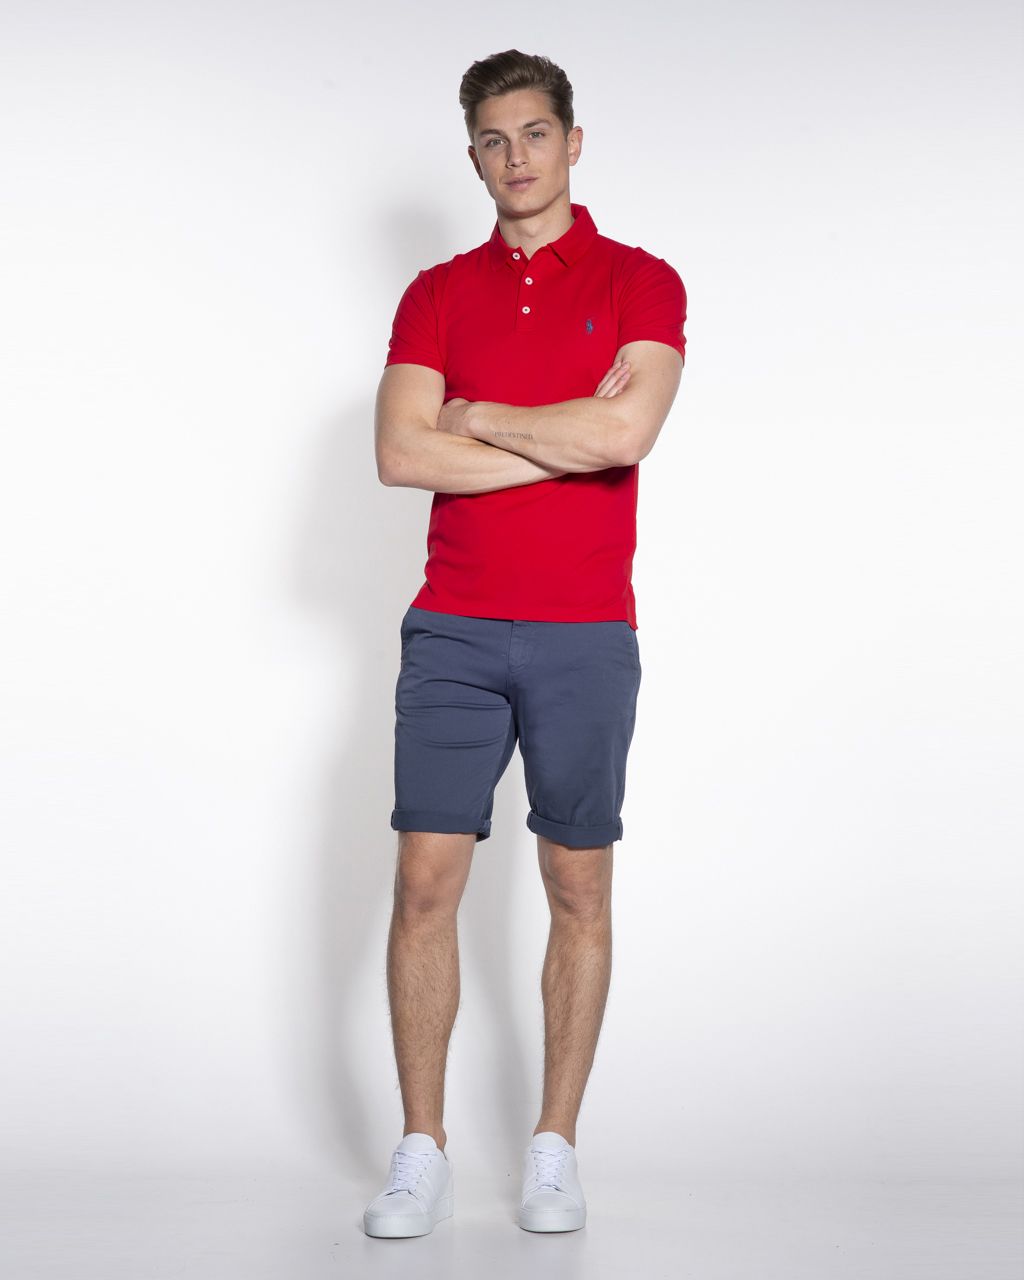 Polo Ralph Lauren Slim Fit Stretch Mesh Polo KM Rood 047432-002-L